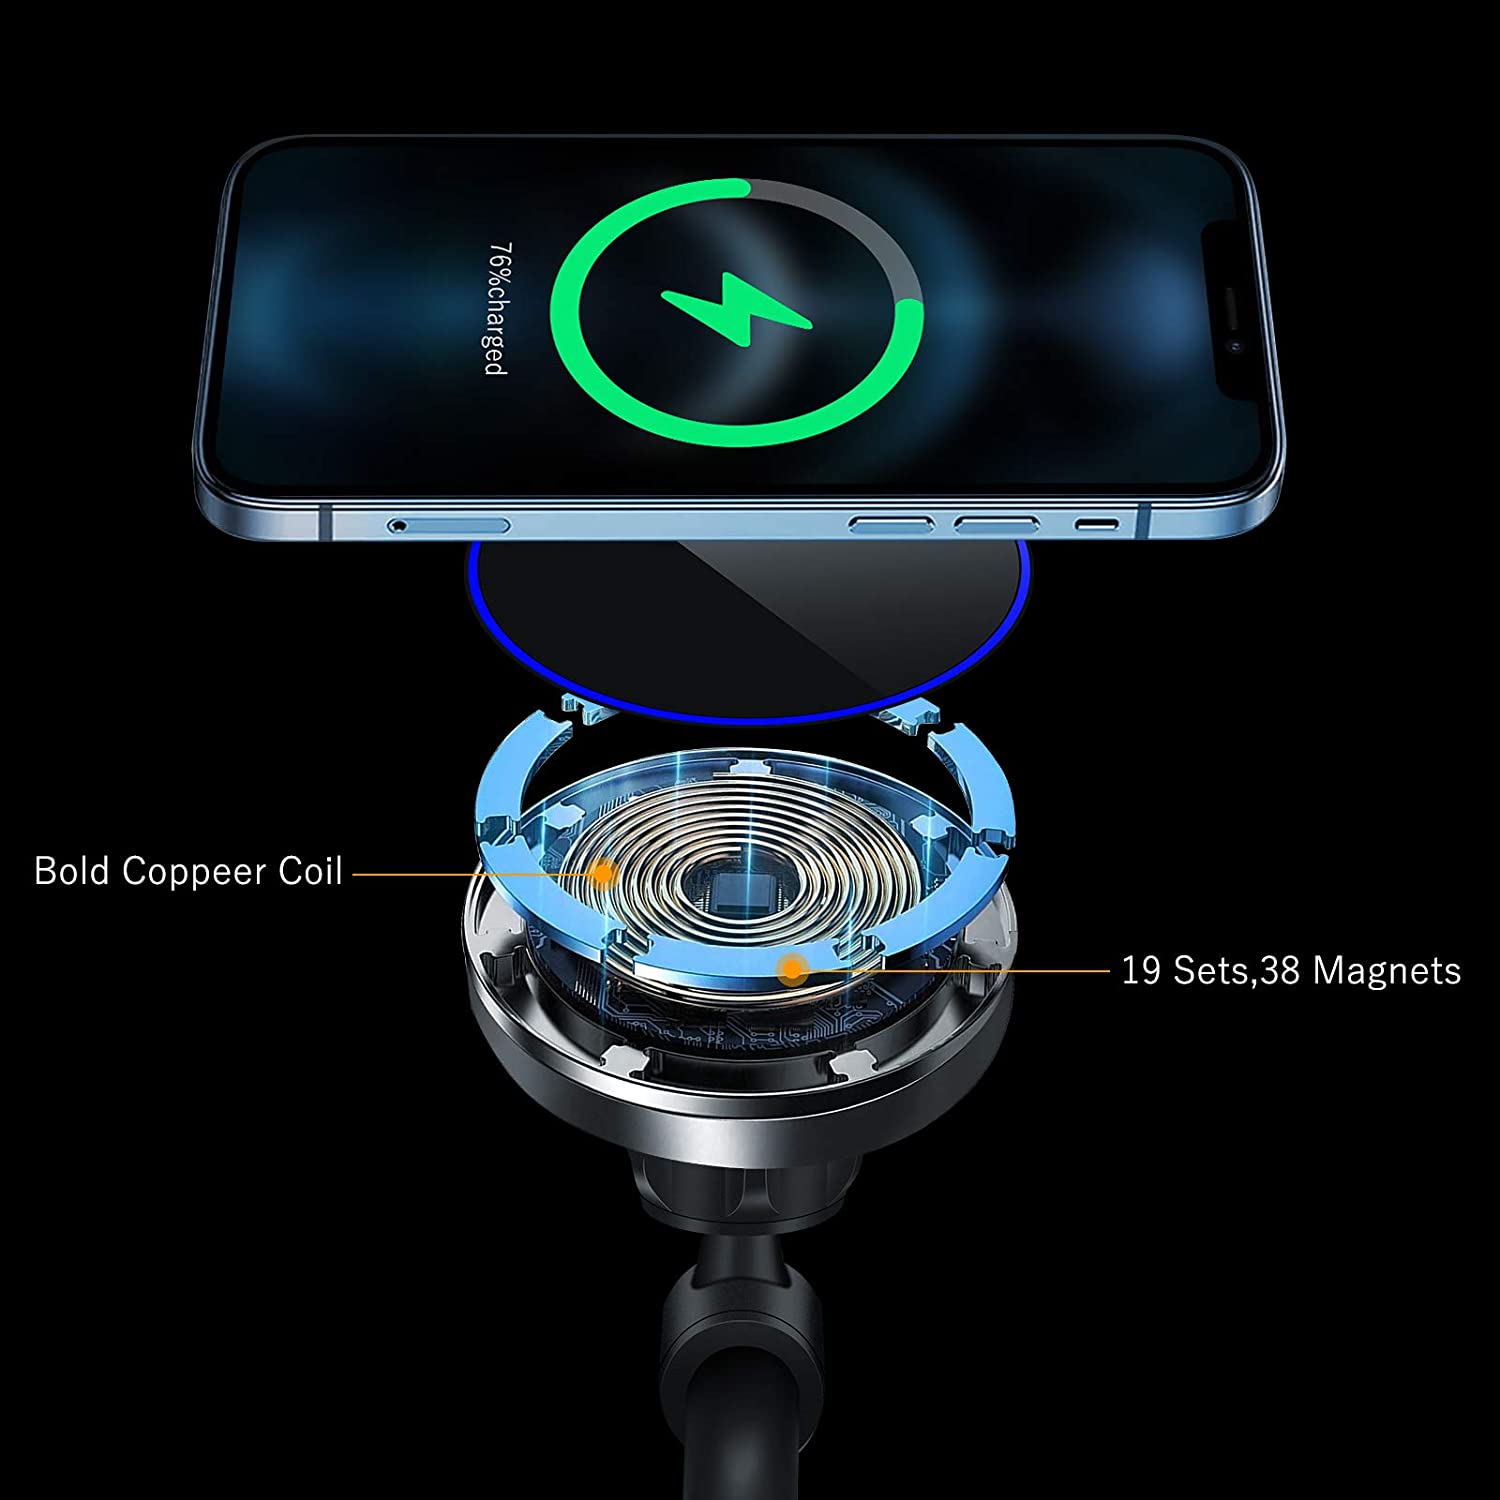 Piosoo 15W Magnetic Wireless Car Charger CD Slot Mount for iPhone 12/12 Pro/12 Pro Max/12 Mini,Powerful Suction Auto-Alignment Mag-Safe Car Mount, Compatible with MagSafe Cases